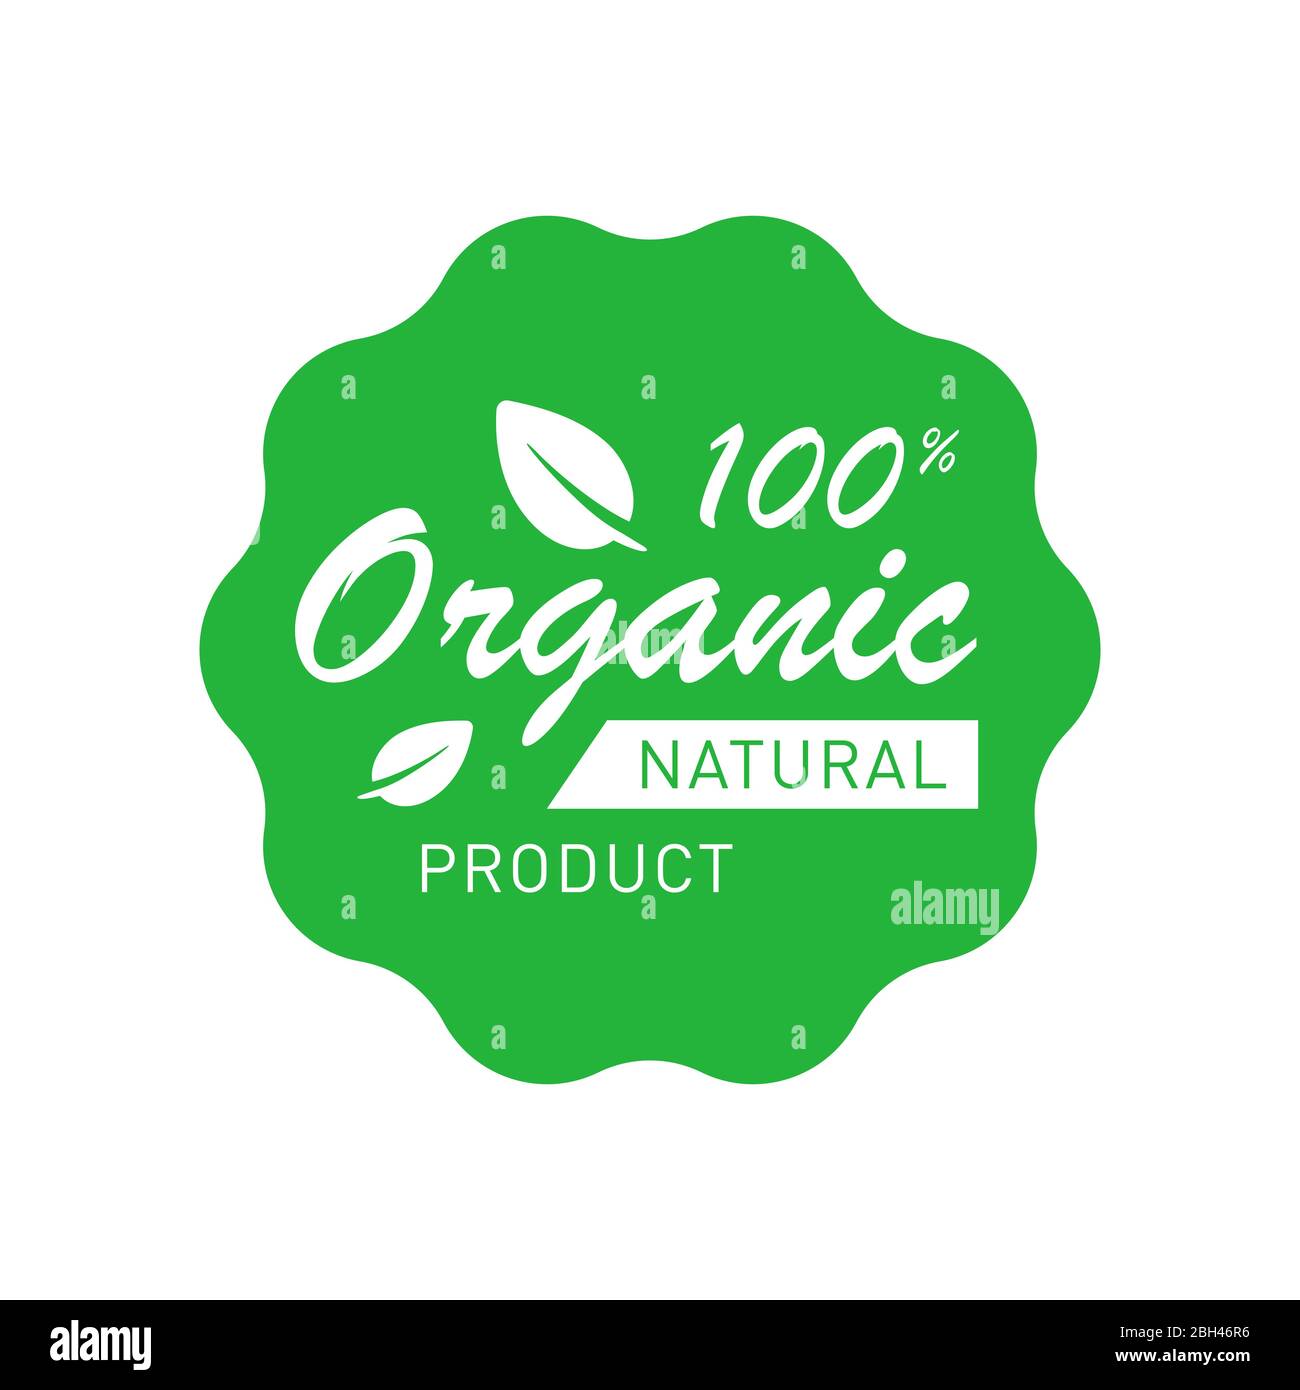 Organic 100 percent natural product badge with leaves. Design element for packaging design and promotional material. Vector illustration. Stock Vector